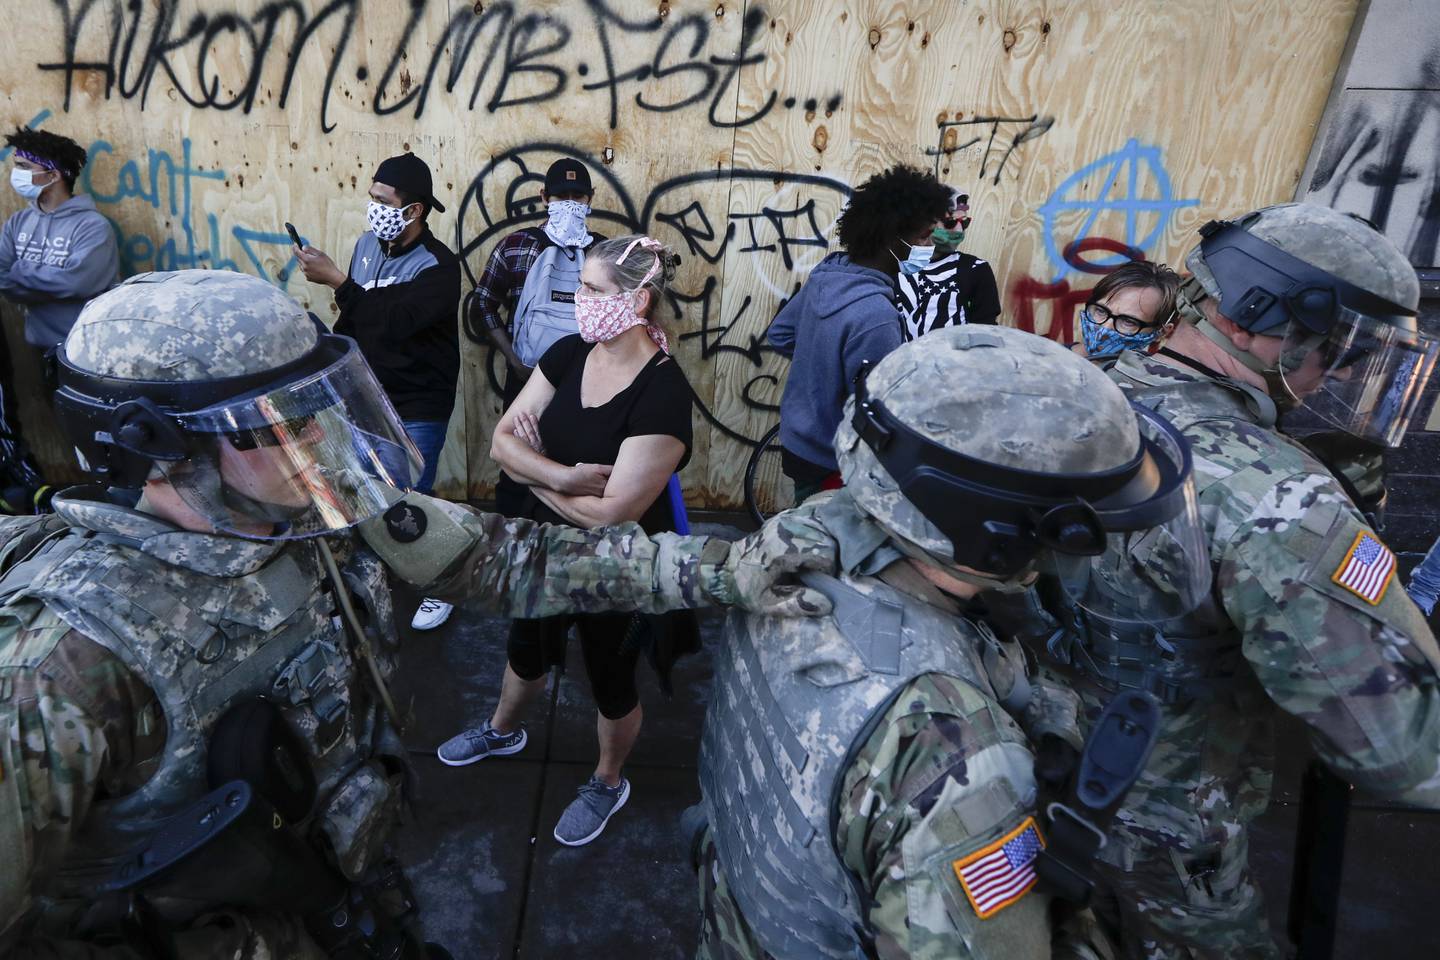 National Guard personnel return to their defensive position as protesters make room for them to fall back following a confrontation on East Lake Street, Friday, May 29, 2020, in St. Paul, Minn.